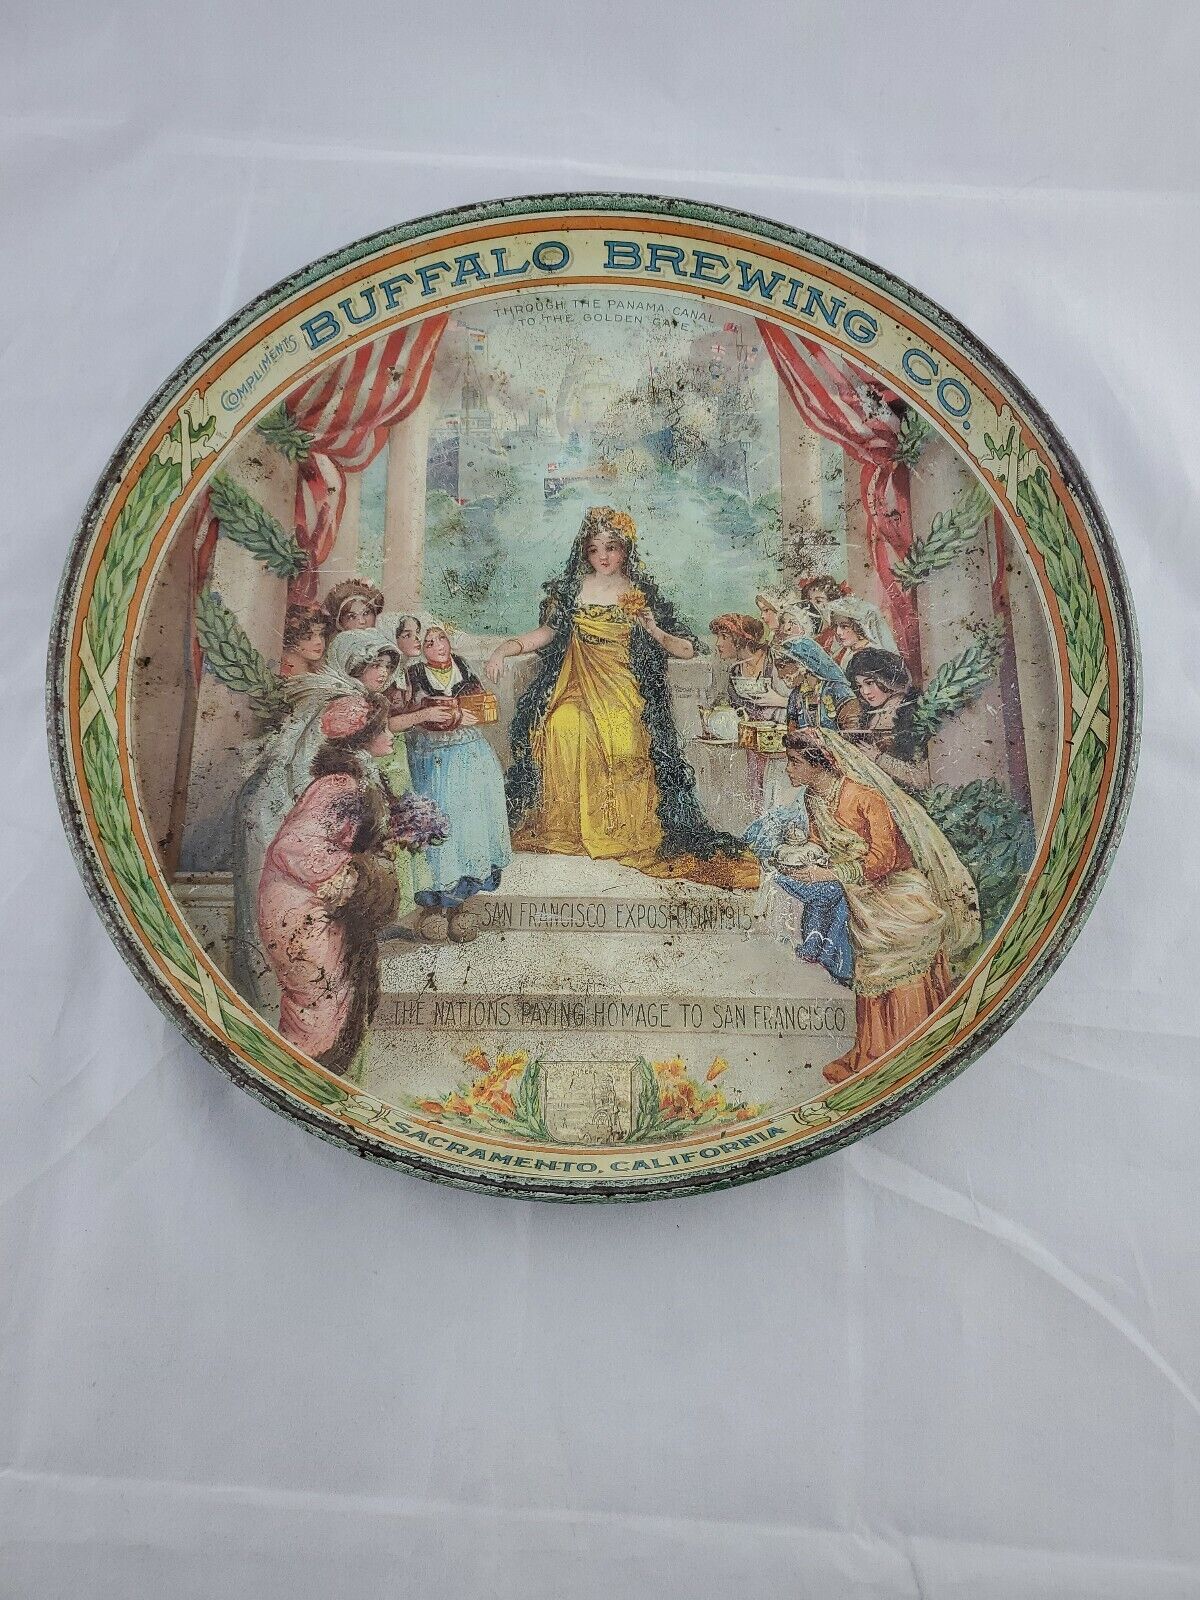 1915 Buffalo Brewing CO. Serving Tray Panama Pacific International exposition 